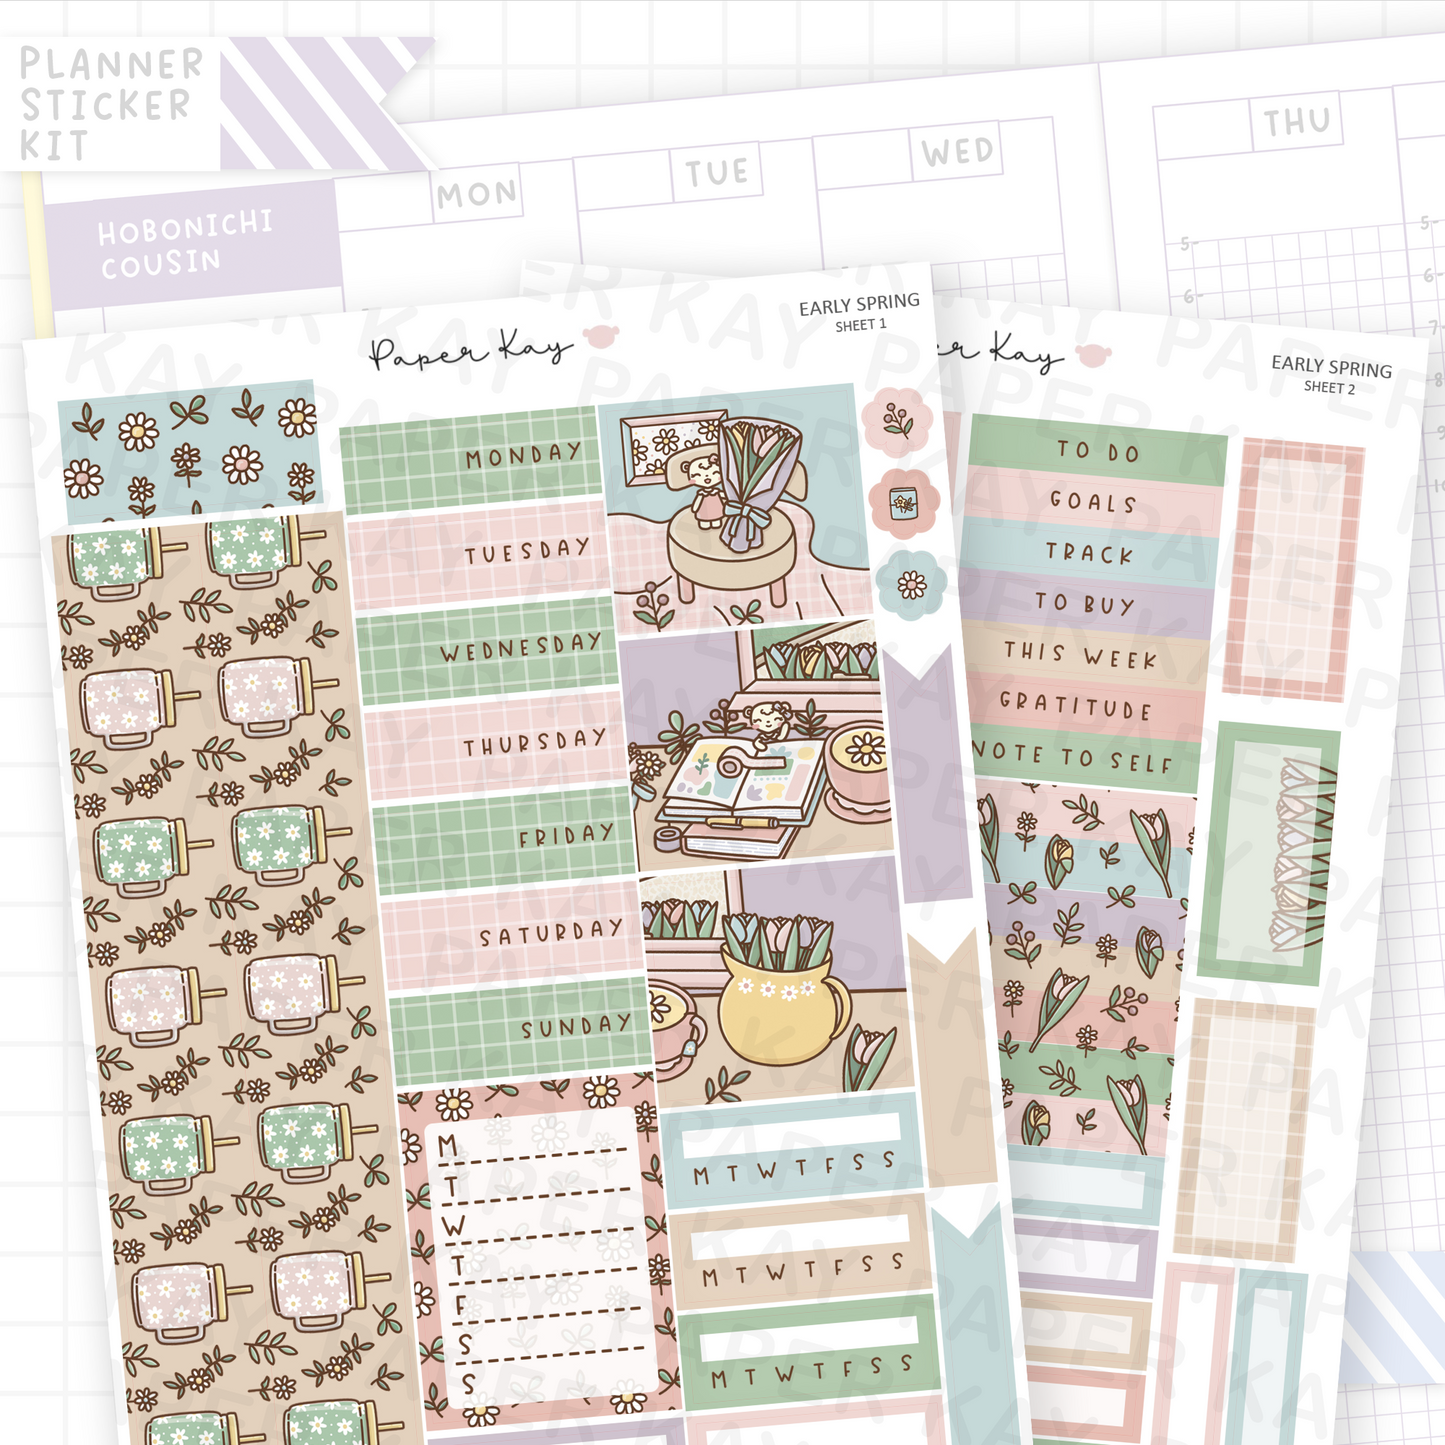 Early Spring Hobonichi Cousin Sticker Kit